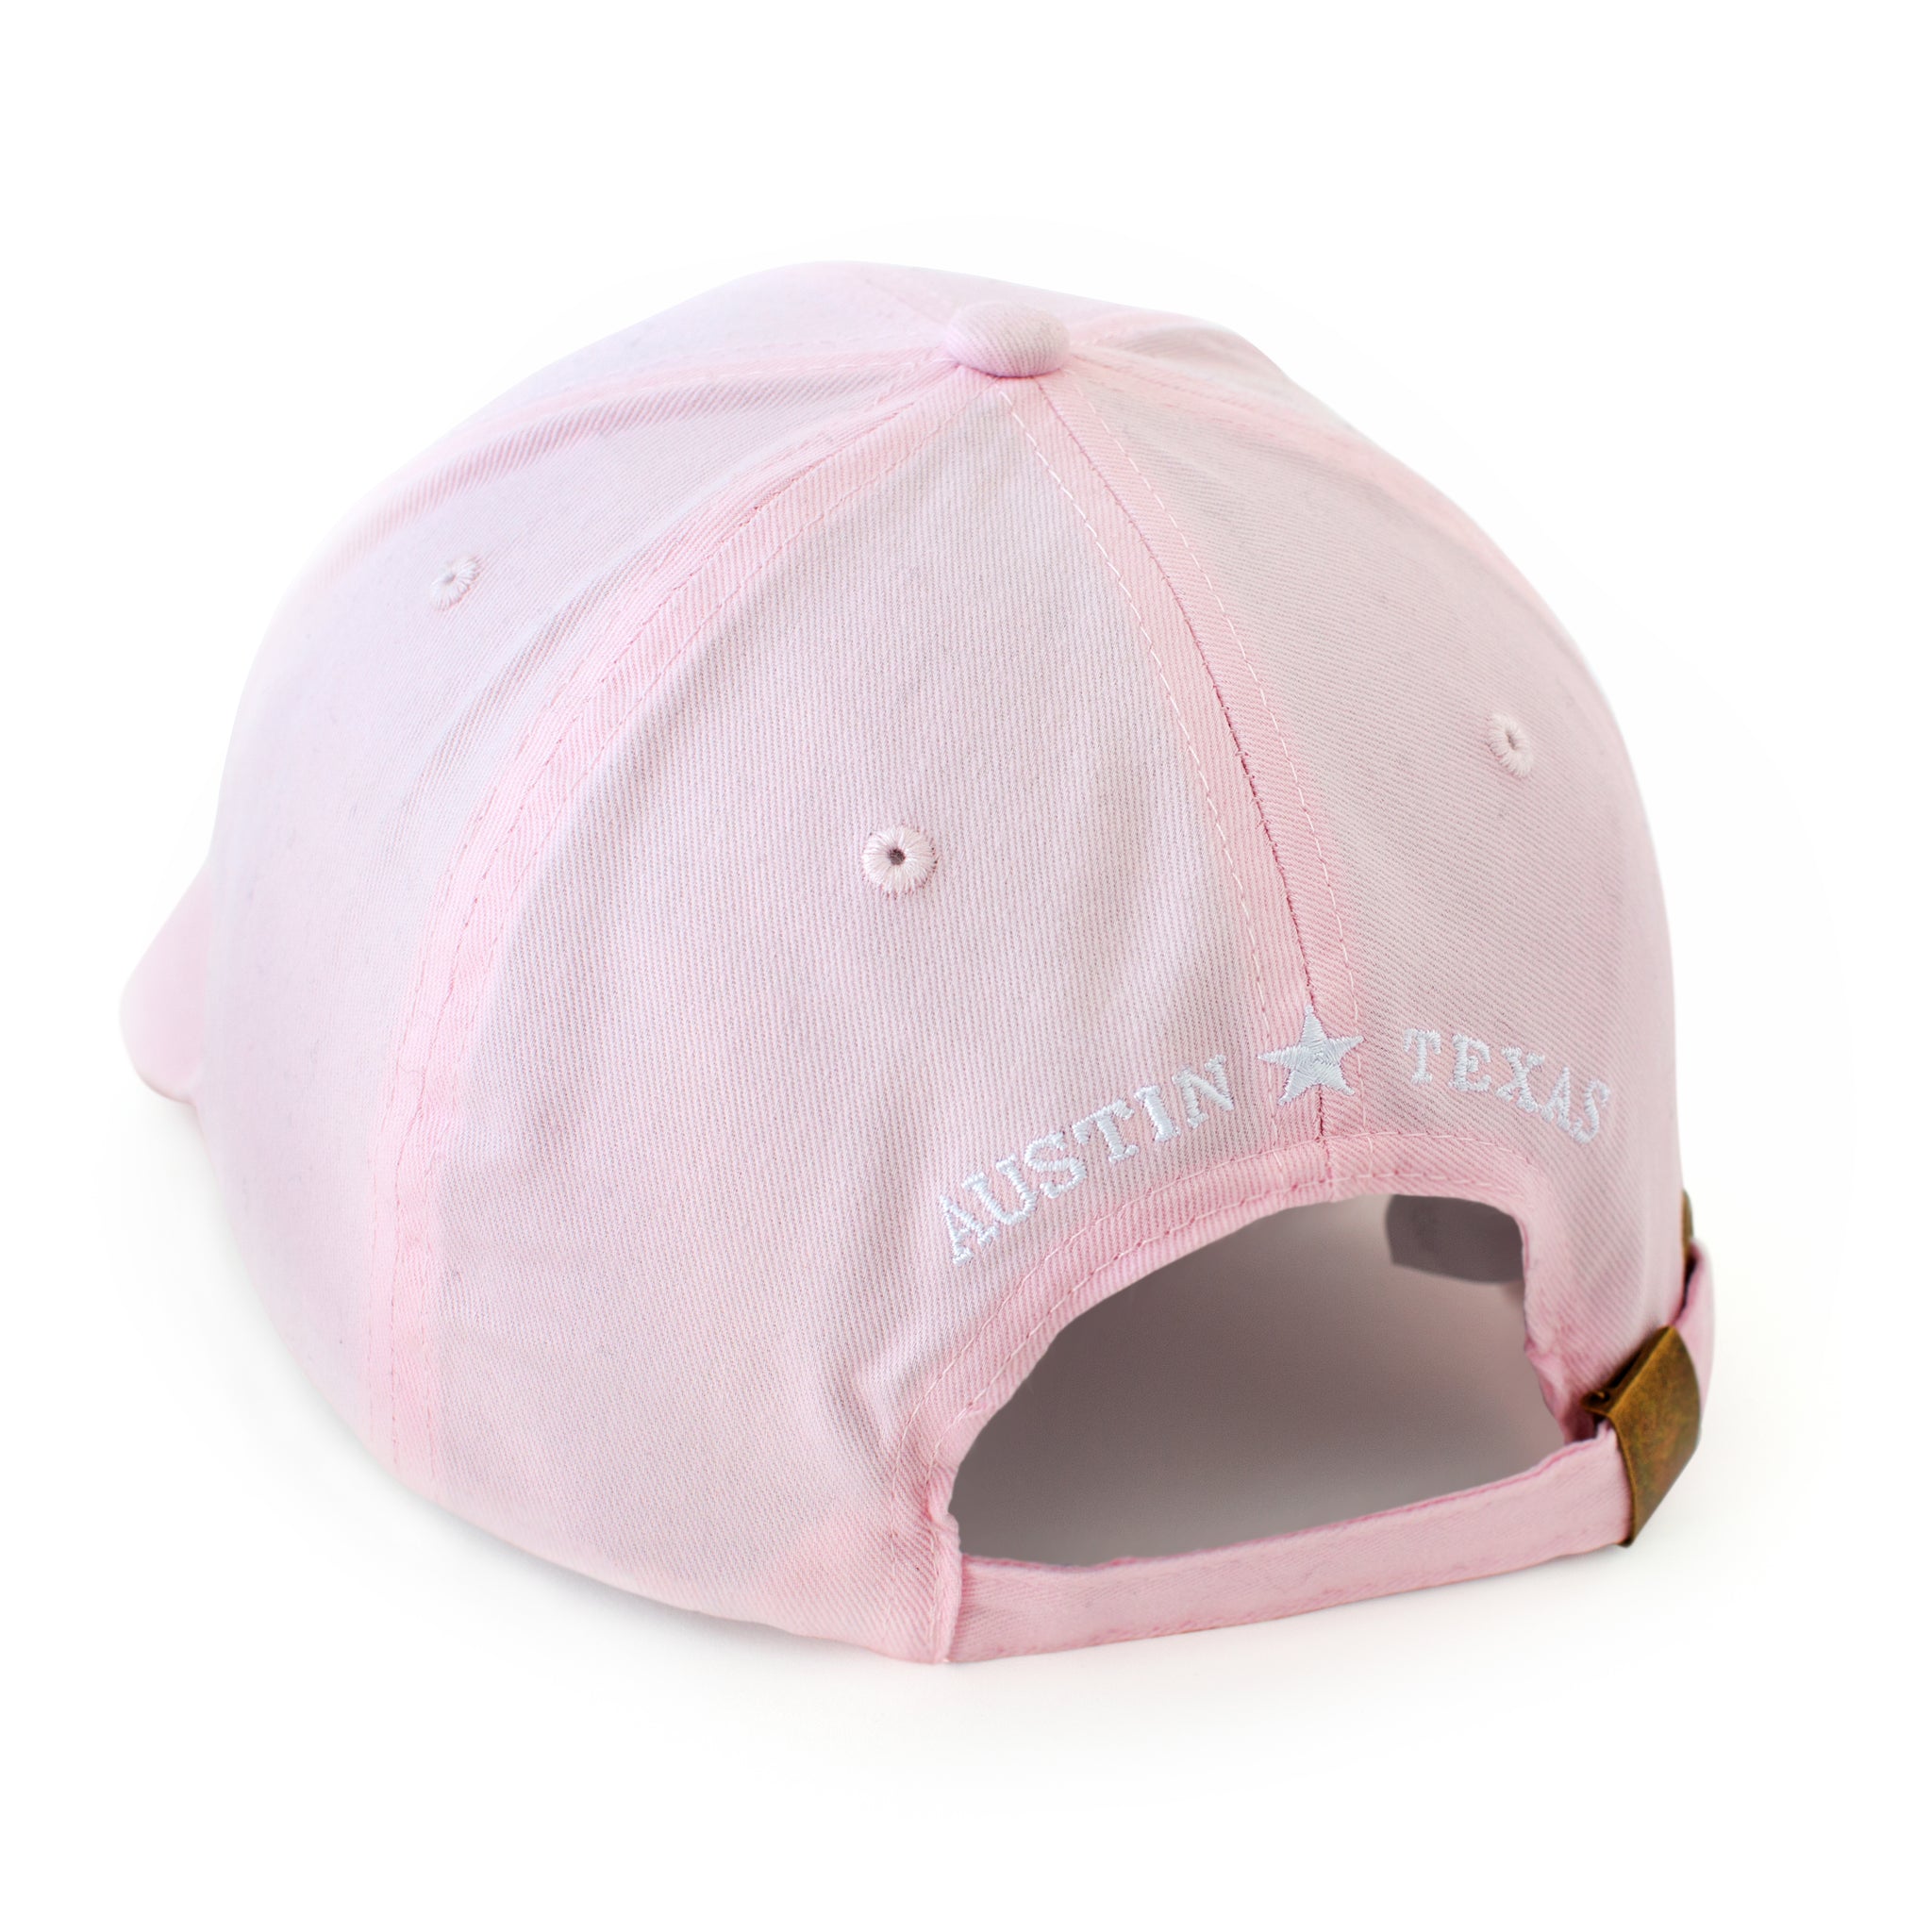 Back of Ladies' Pink Hat with Austin, Texas text